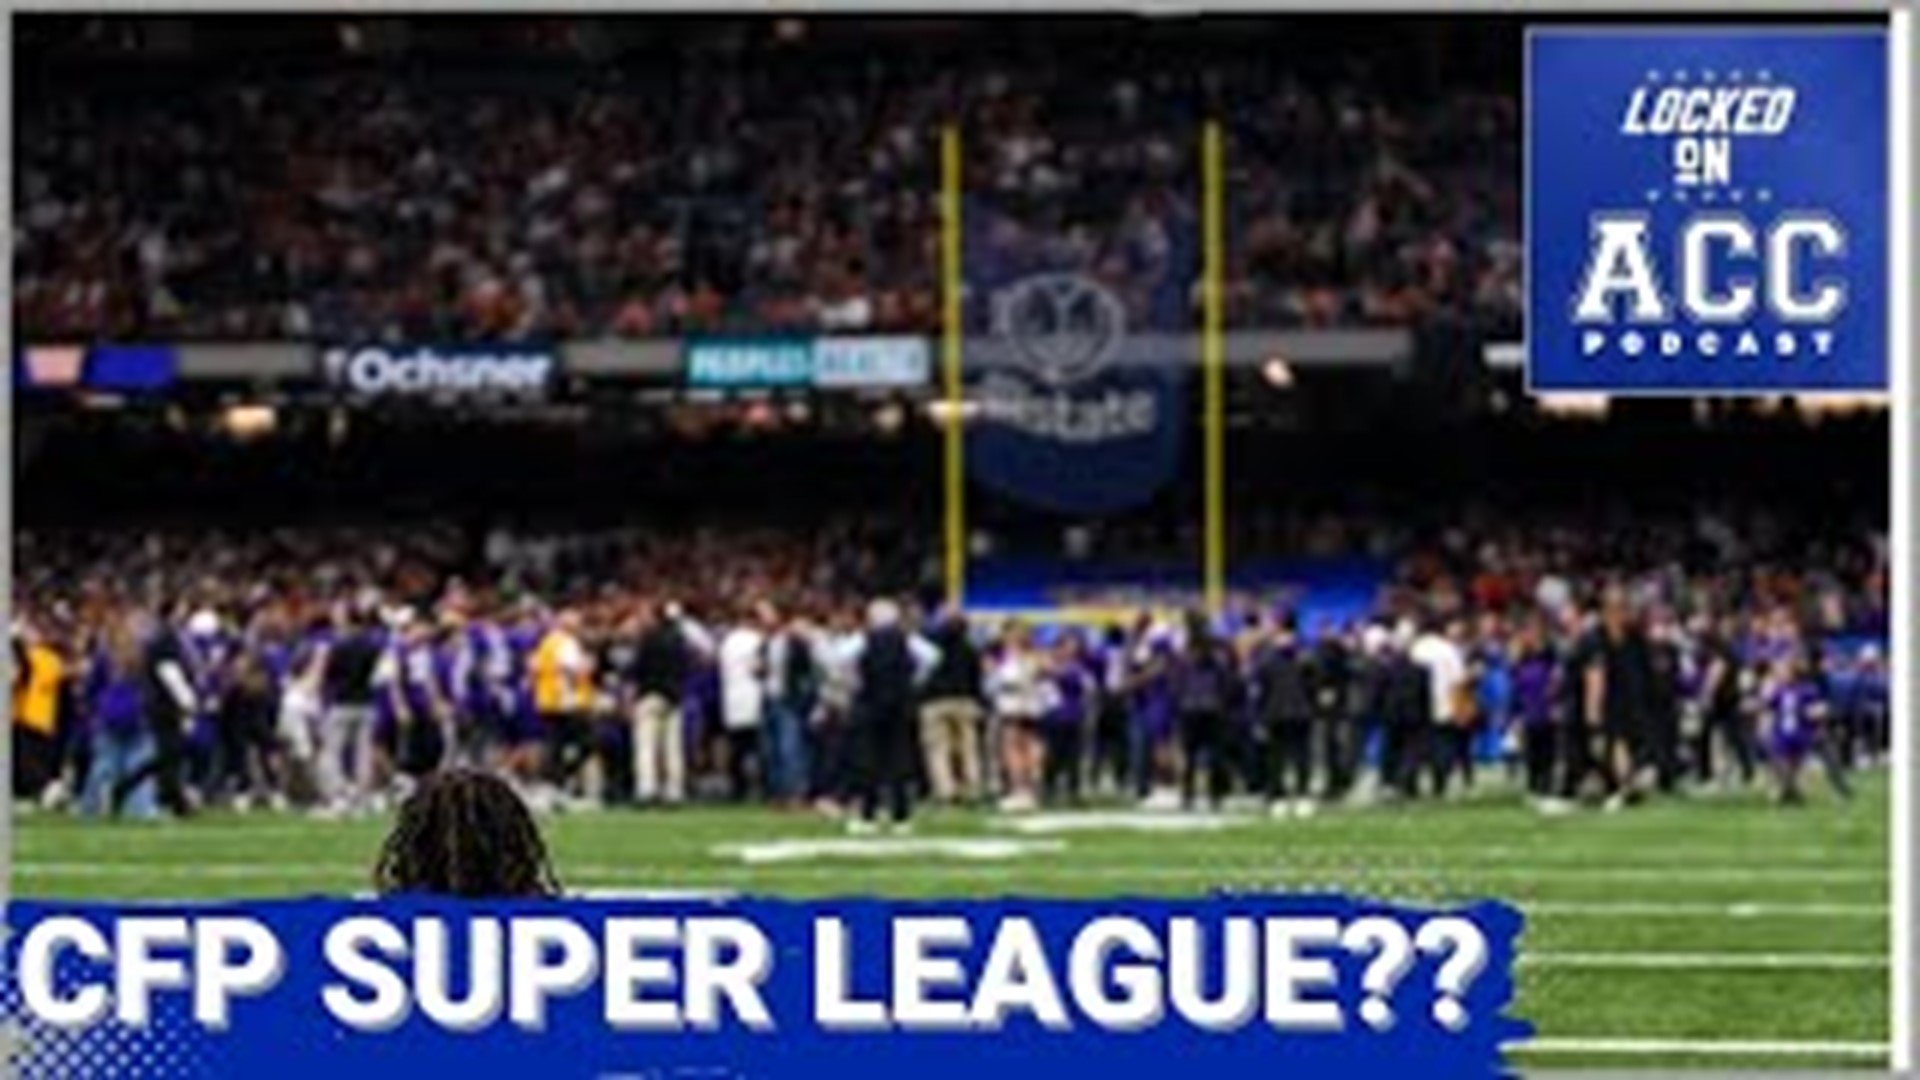 A new proposal for a college football “super league” has been reported by Andrew Marchand and Stewart Mandel of The Athletic.